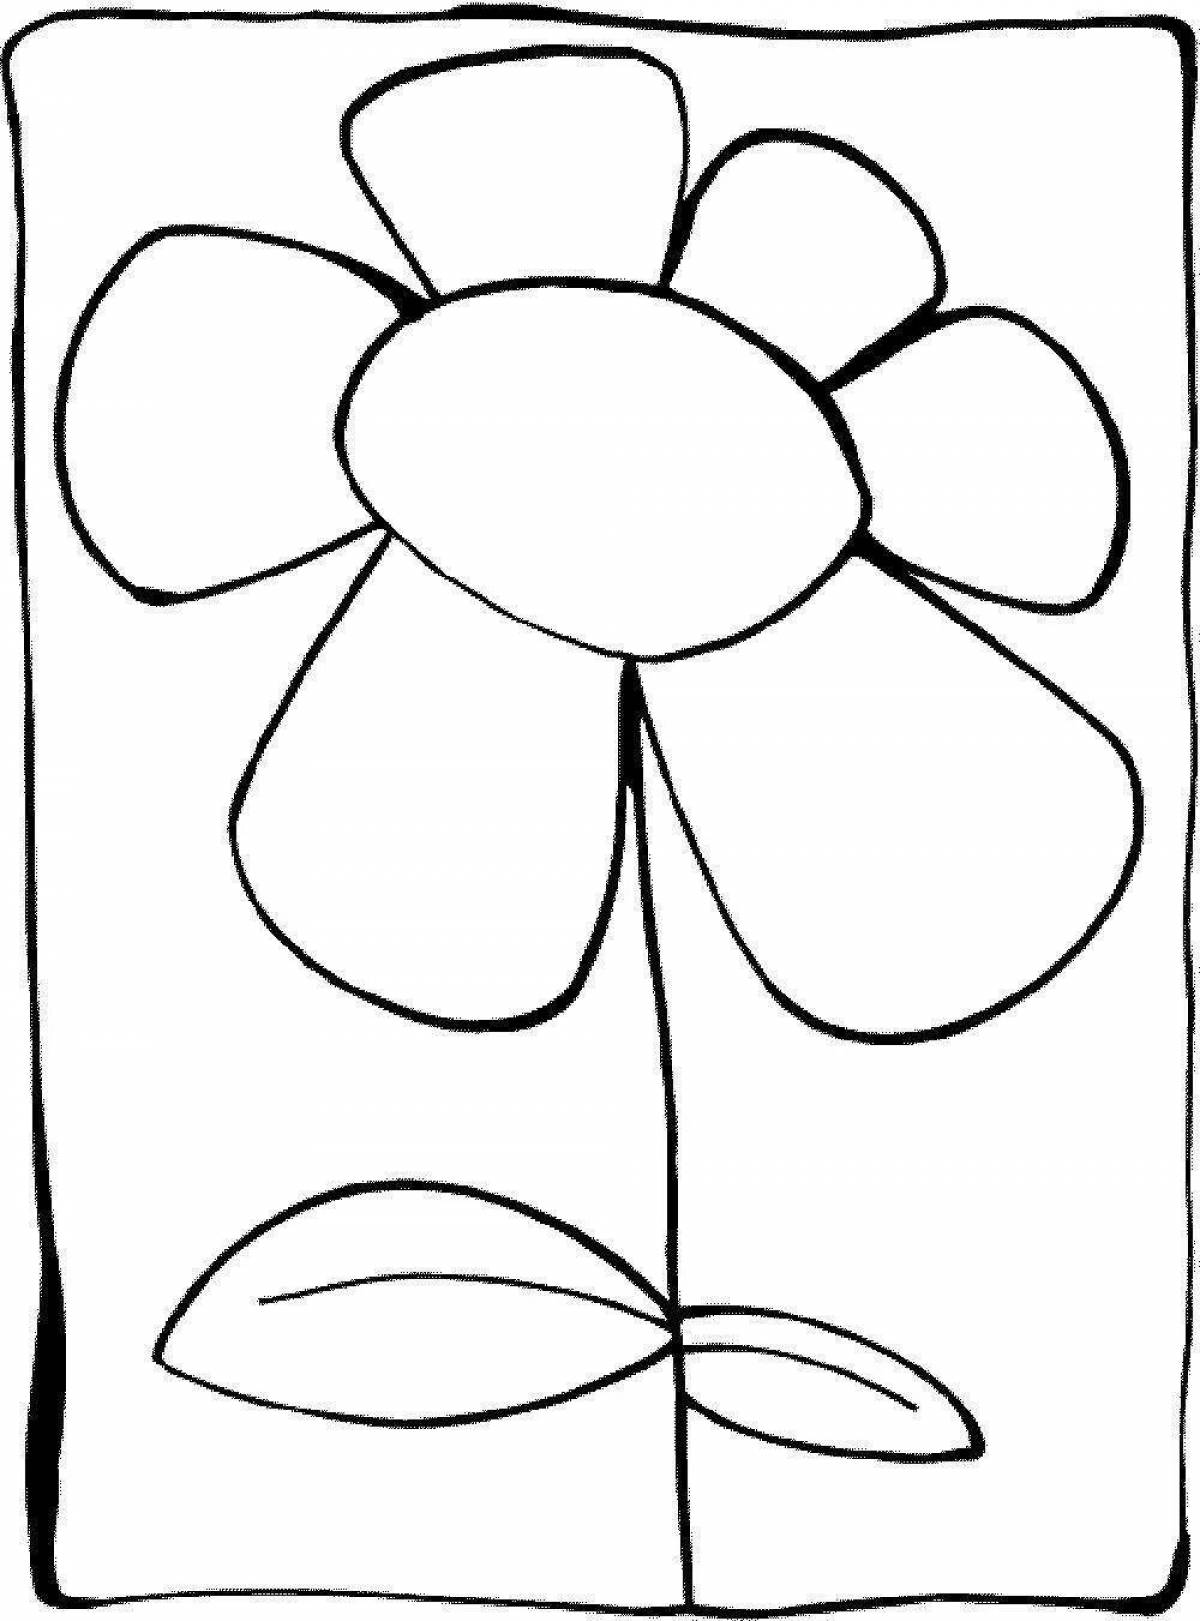 Gorgeous seven-flower coloring book